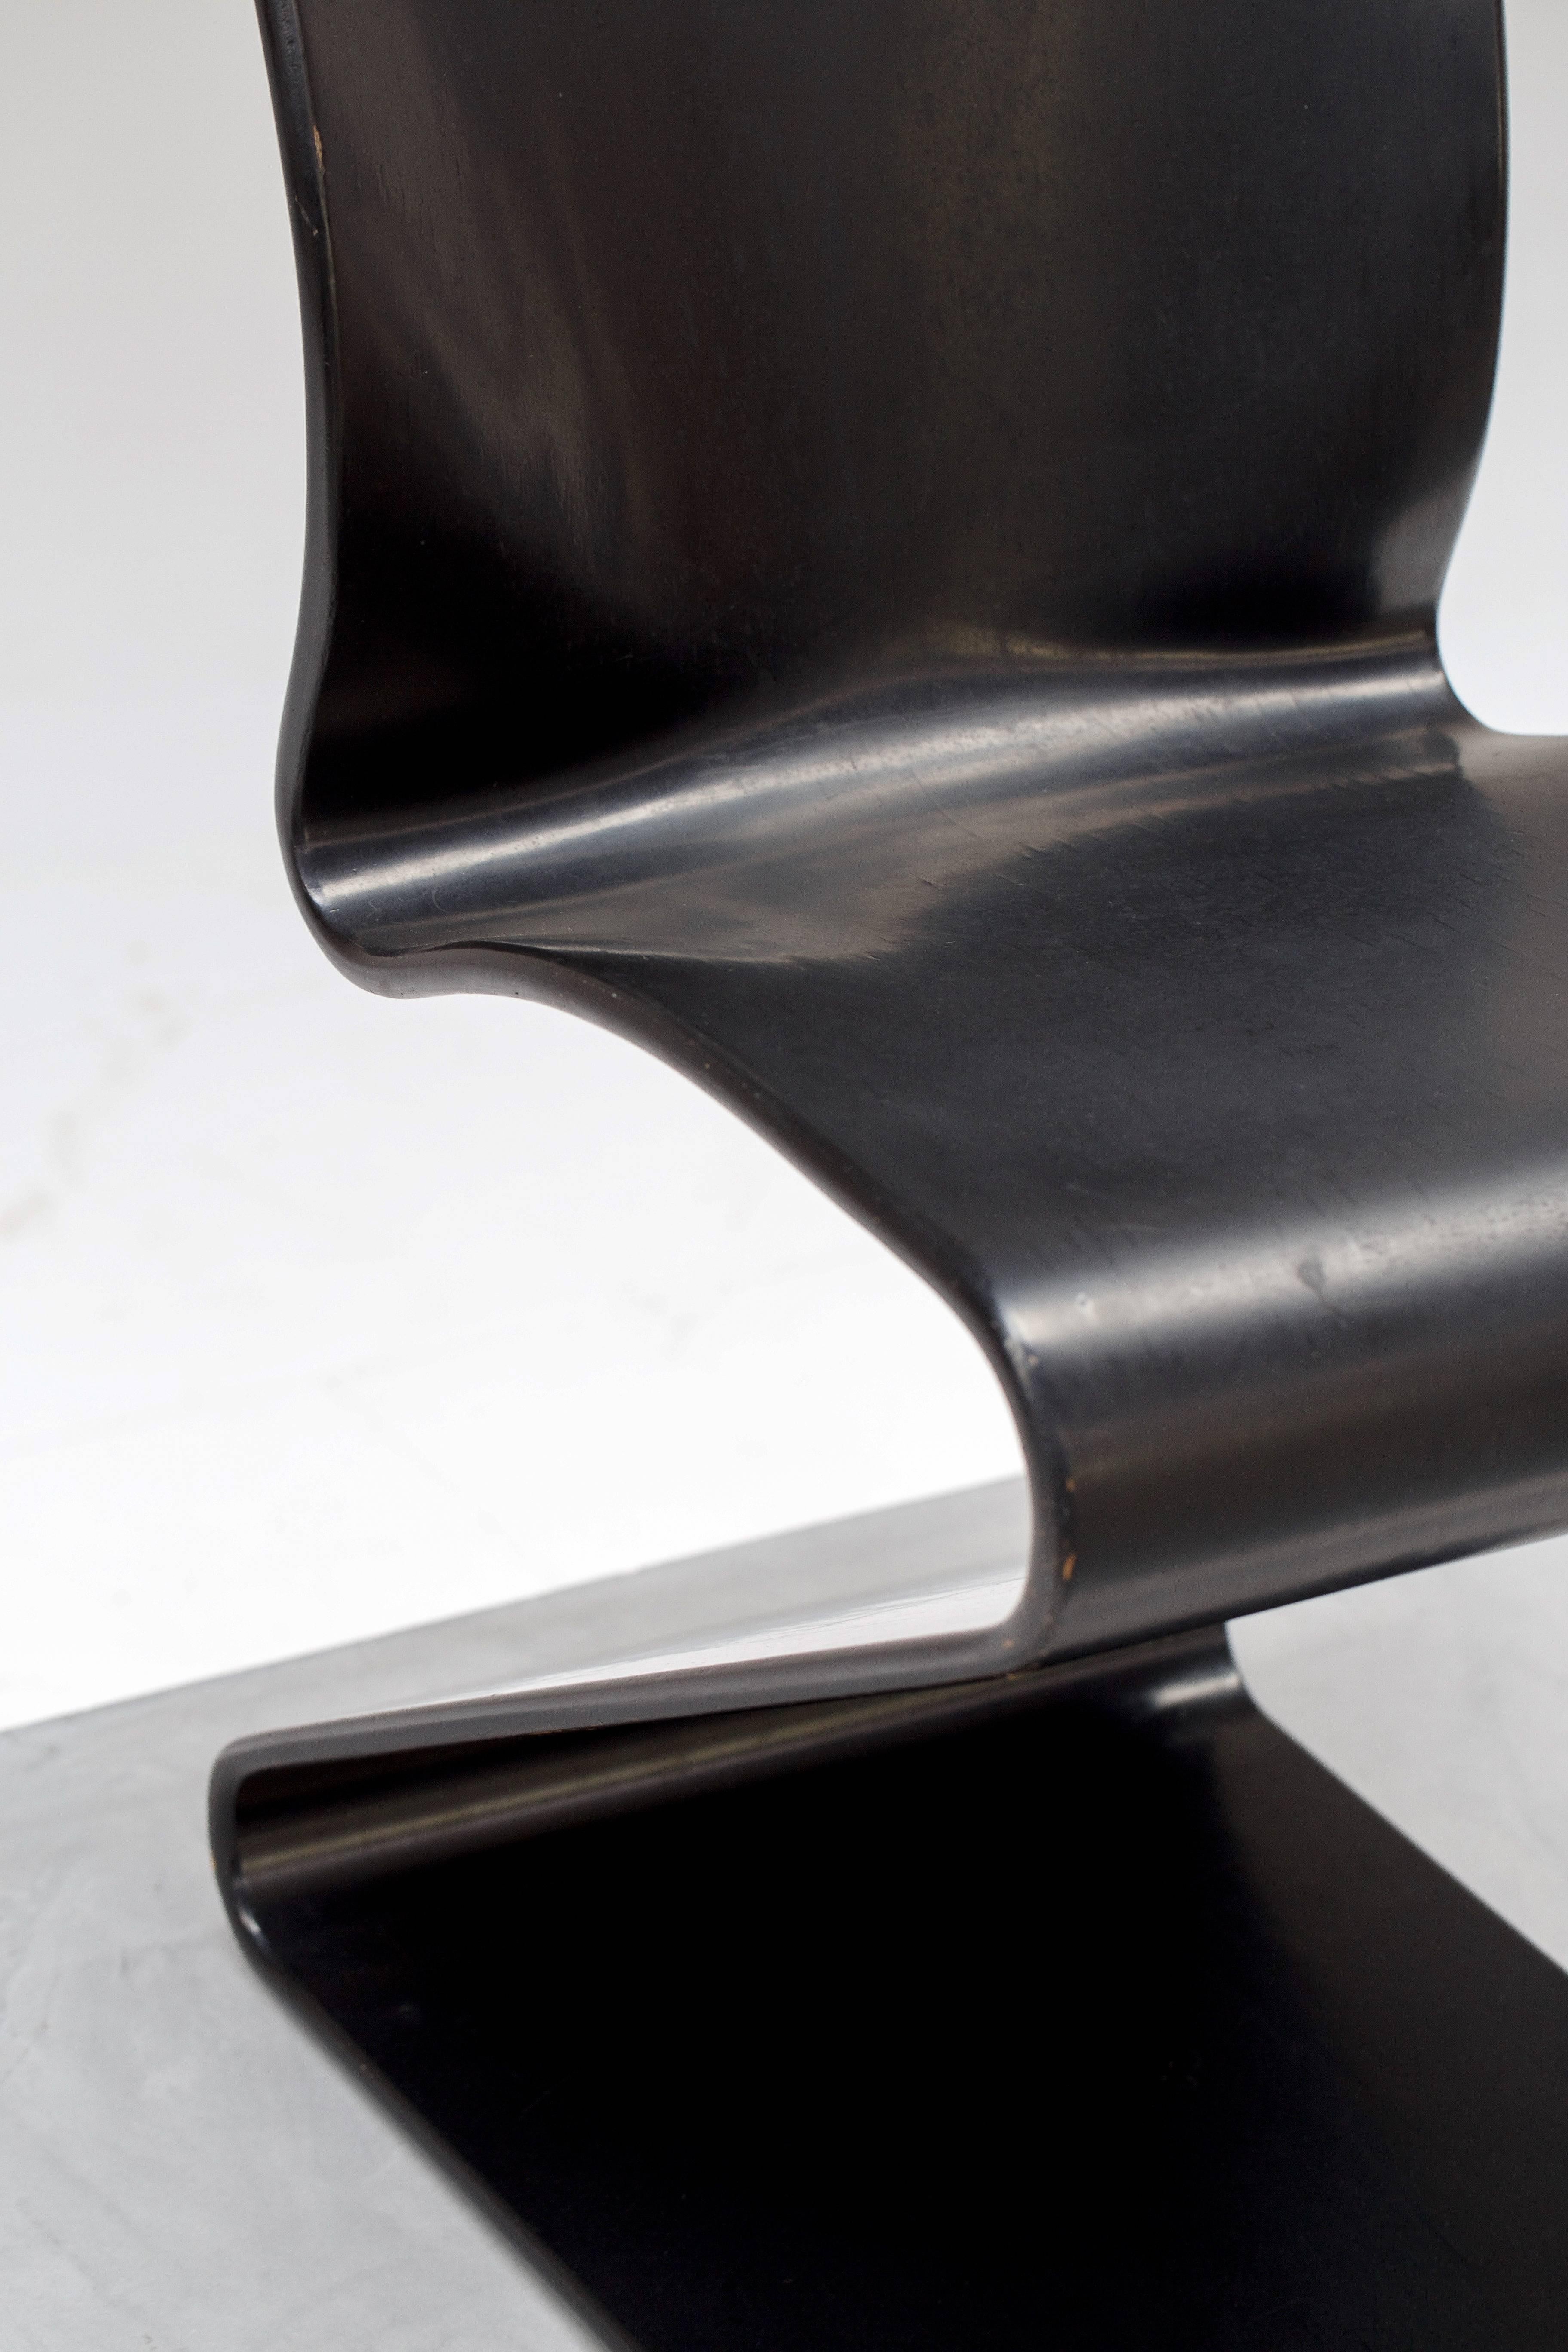 S-chair
Year: 1956 (Three years before he designed his world famous S-chair) 


Material: lacquered plywood, in 14 layers
Color: black
The chair still has its original label by 'Thonet'.
The black paint shows a great patina and the chair has